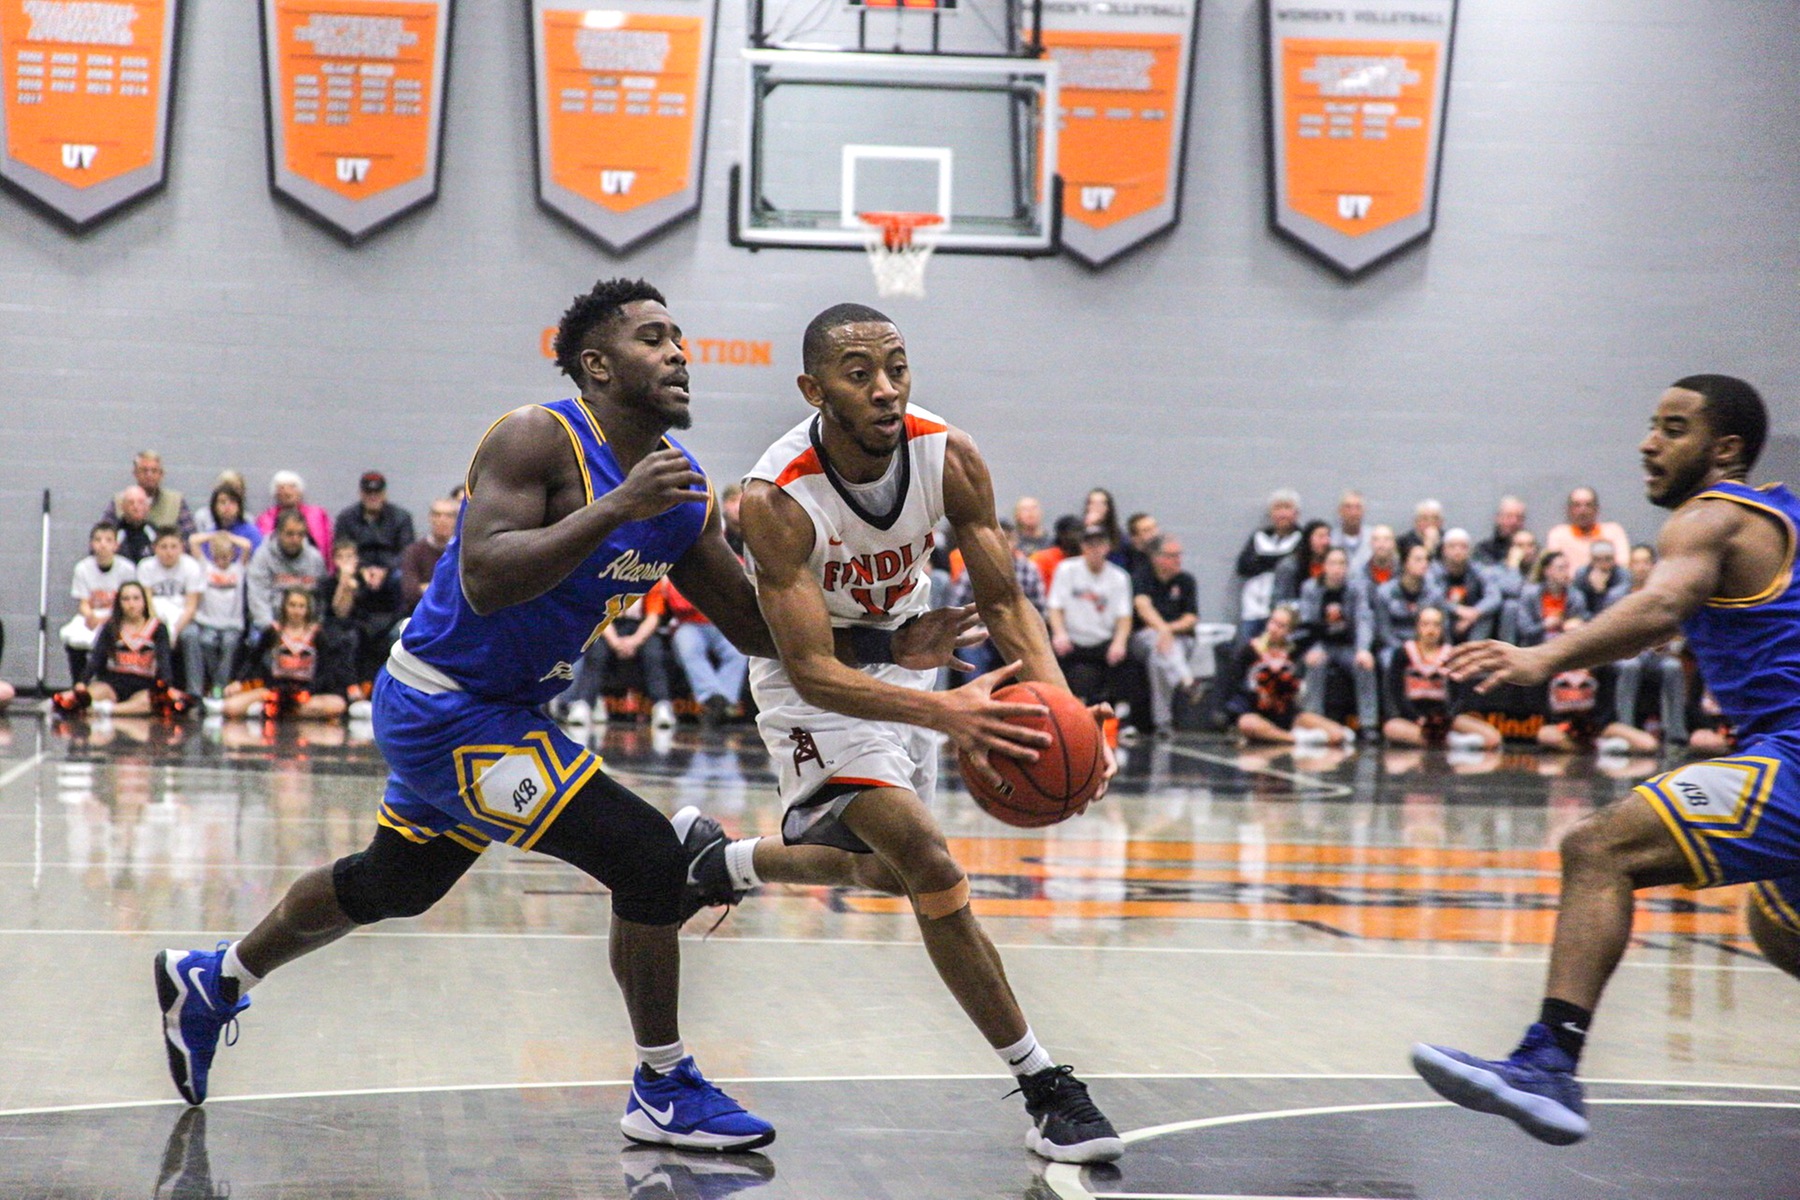 Oilers Win 8th Straight | Beat Battlers 79-72